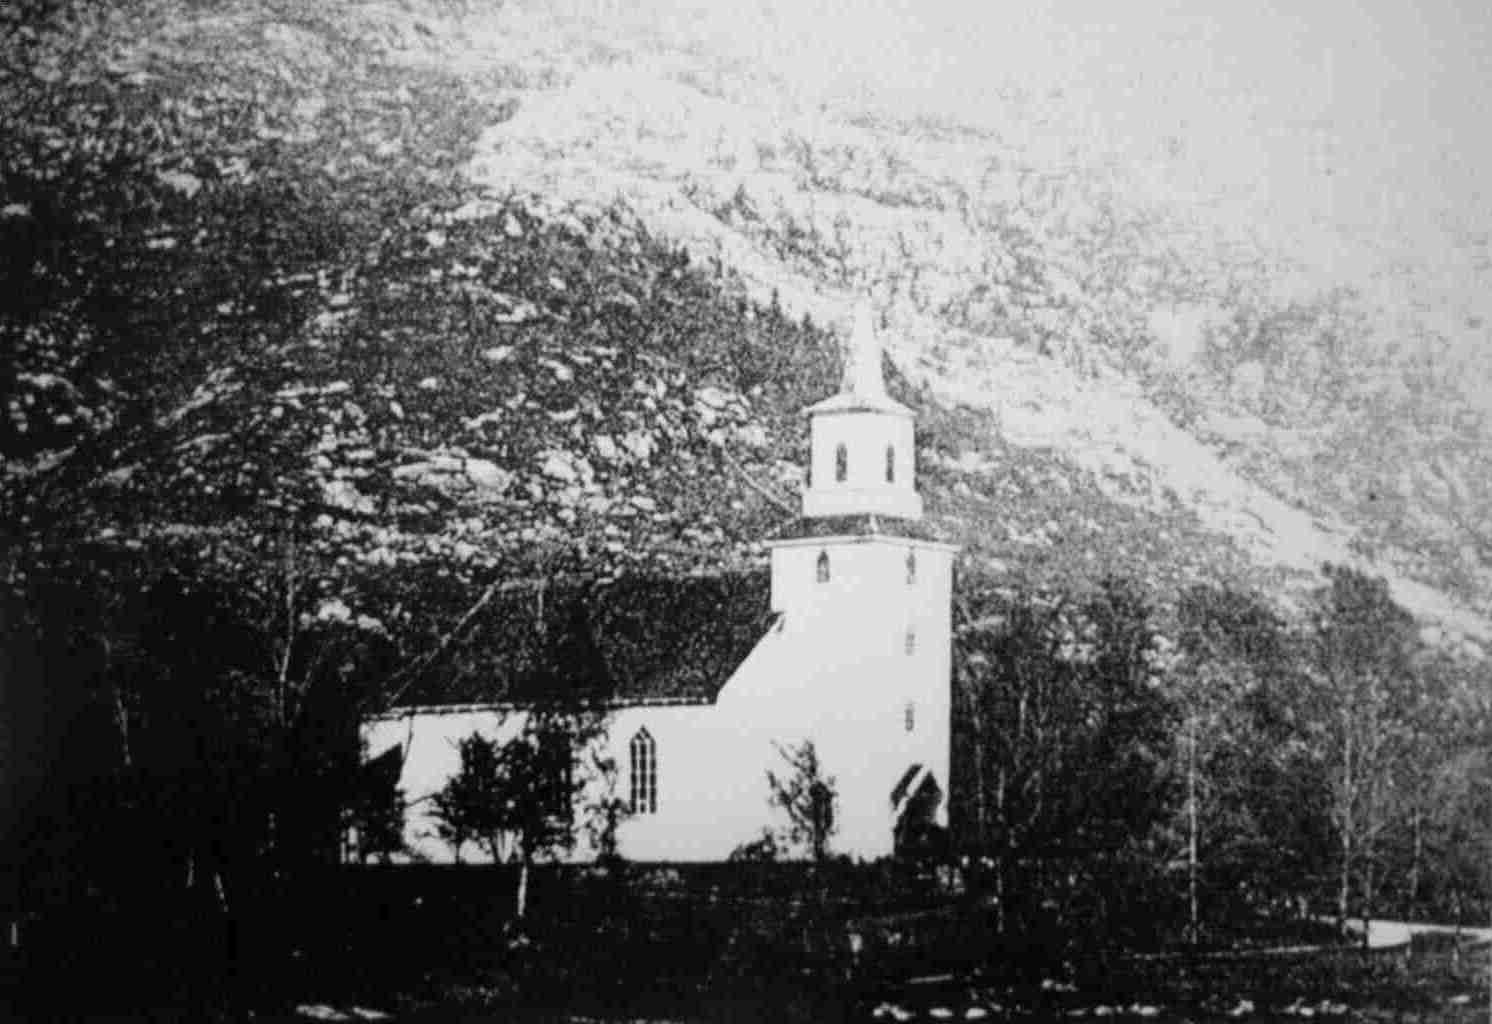 The 3rd church was built in 1872 